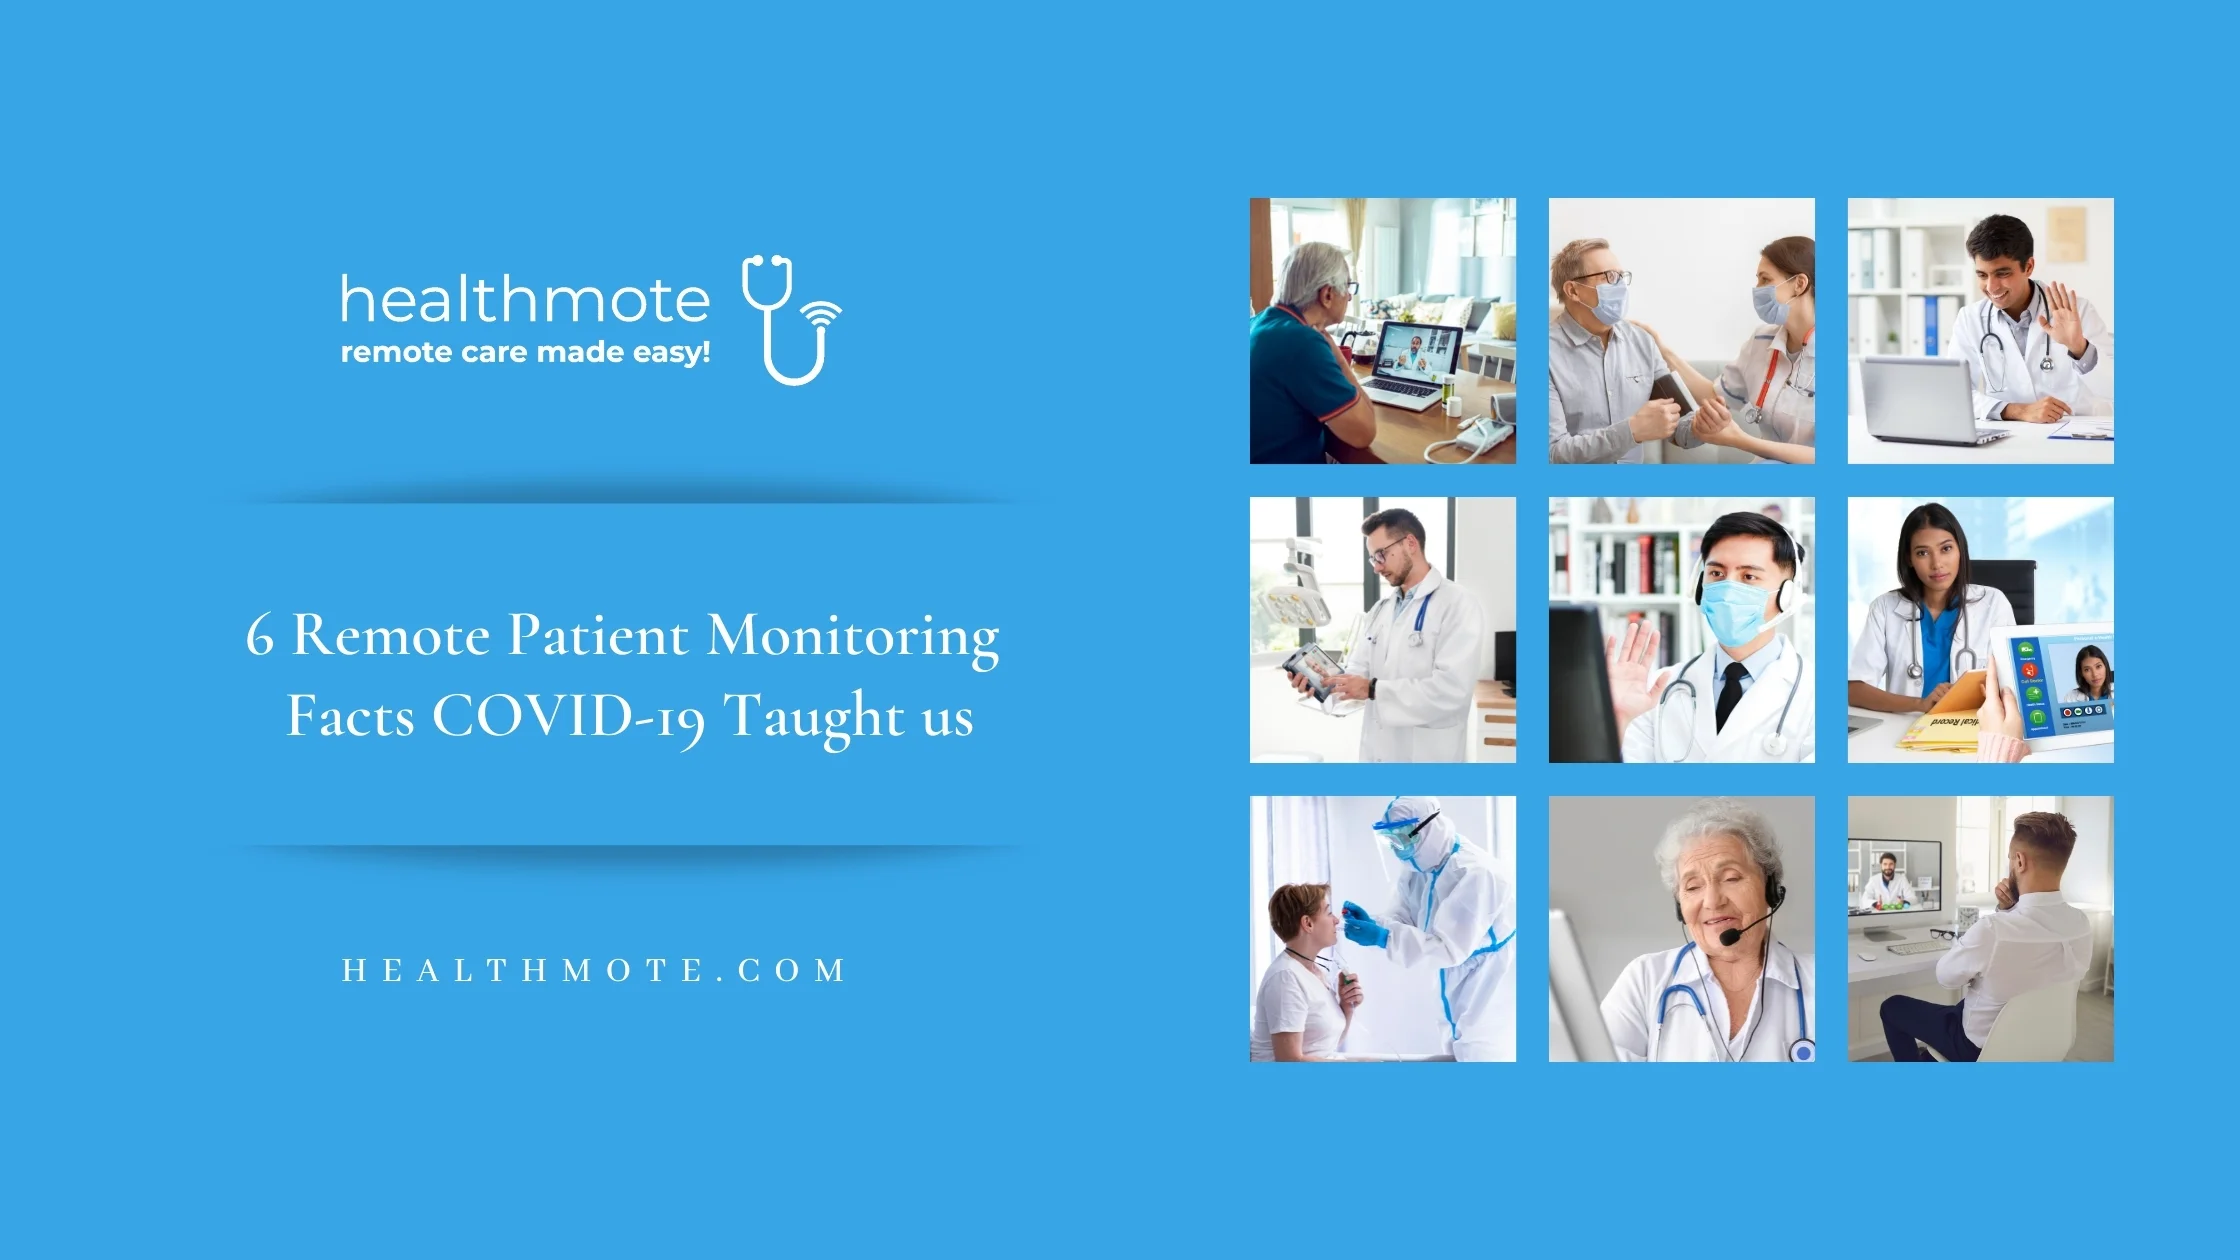 6 Remote Patient Monitoring Facts COVID-19 Taught us